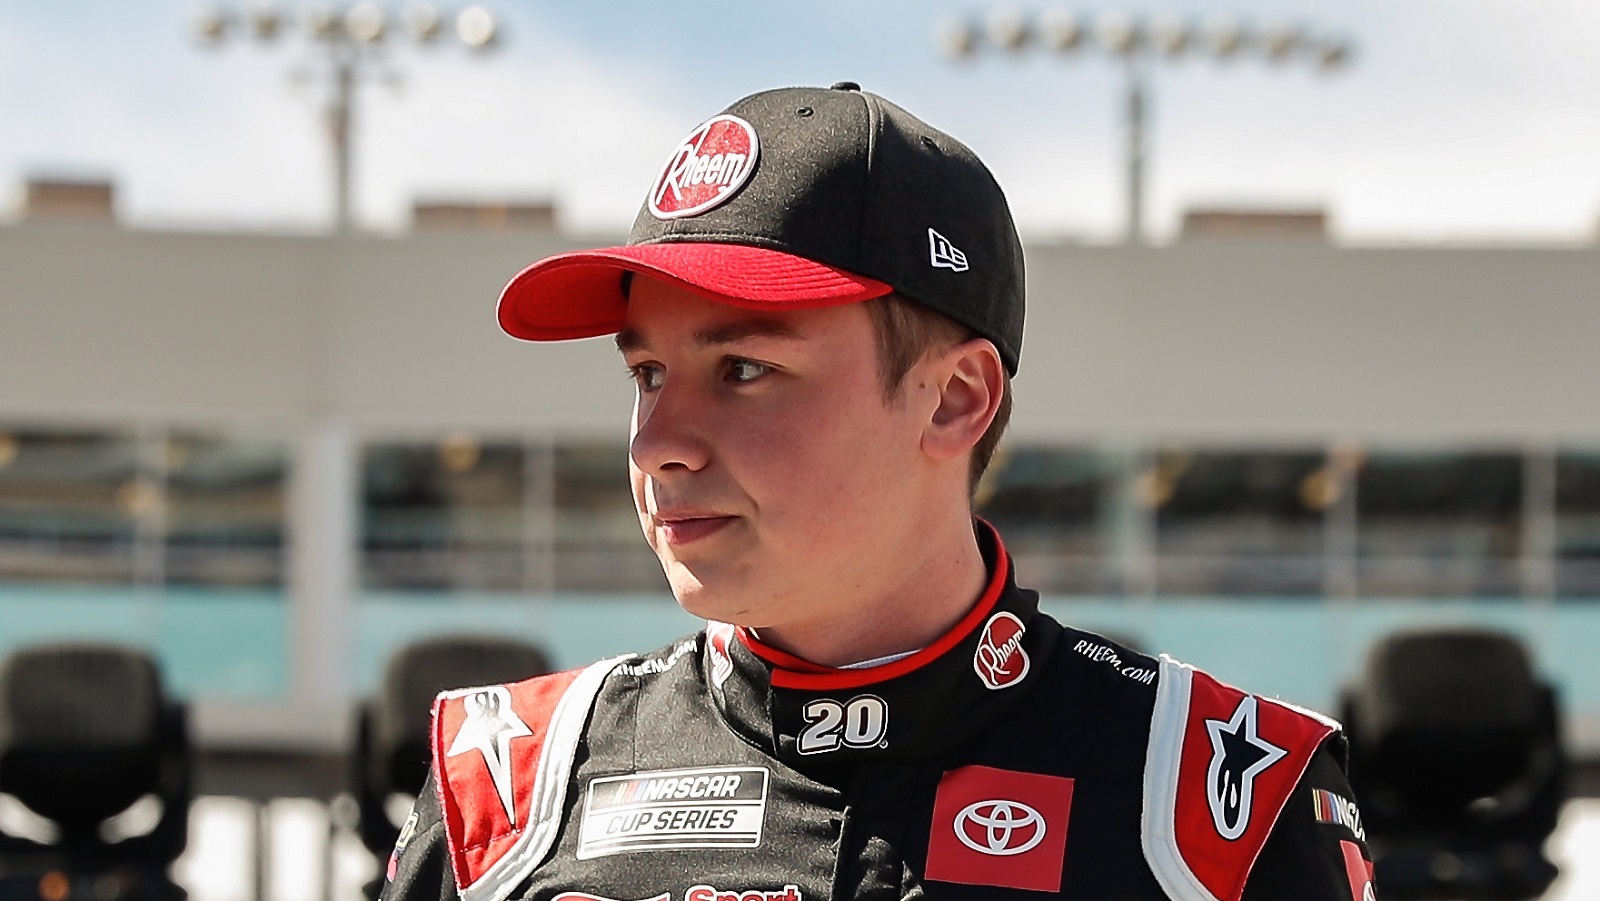 Christopher Bell, driver of the No. 20 Joe Gibbs Racing Toyota, looks on before the NASCAR Cup Series Ruoff Mortgage 500 on March 13, 2022 at Phoenix Raceway. | Kevin Abele/Icon Sportswire via Getty Images